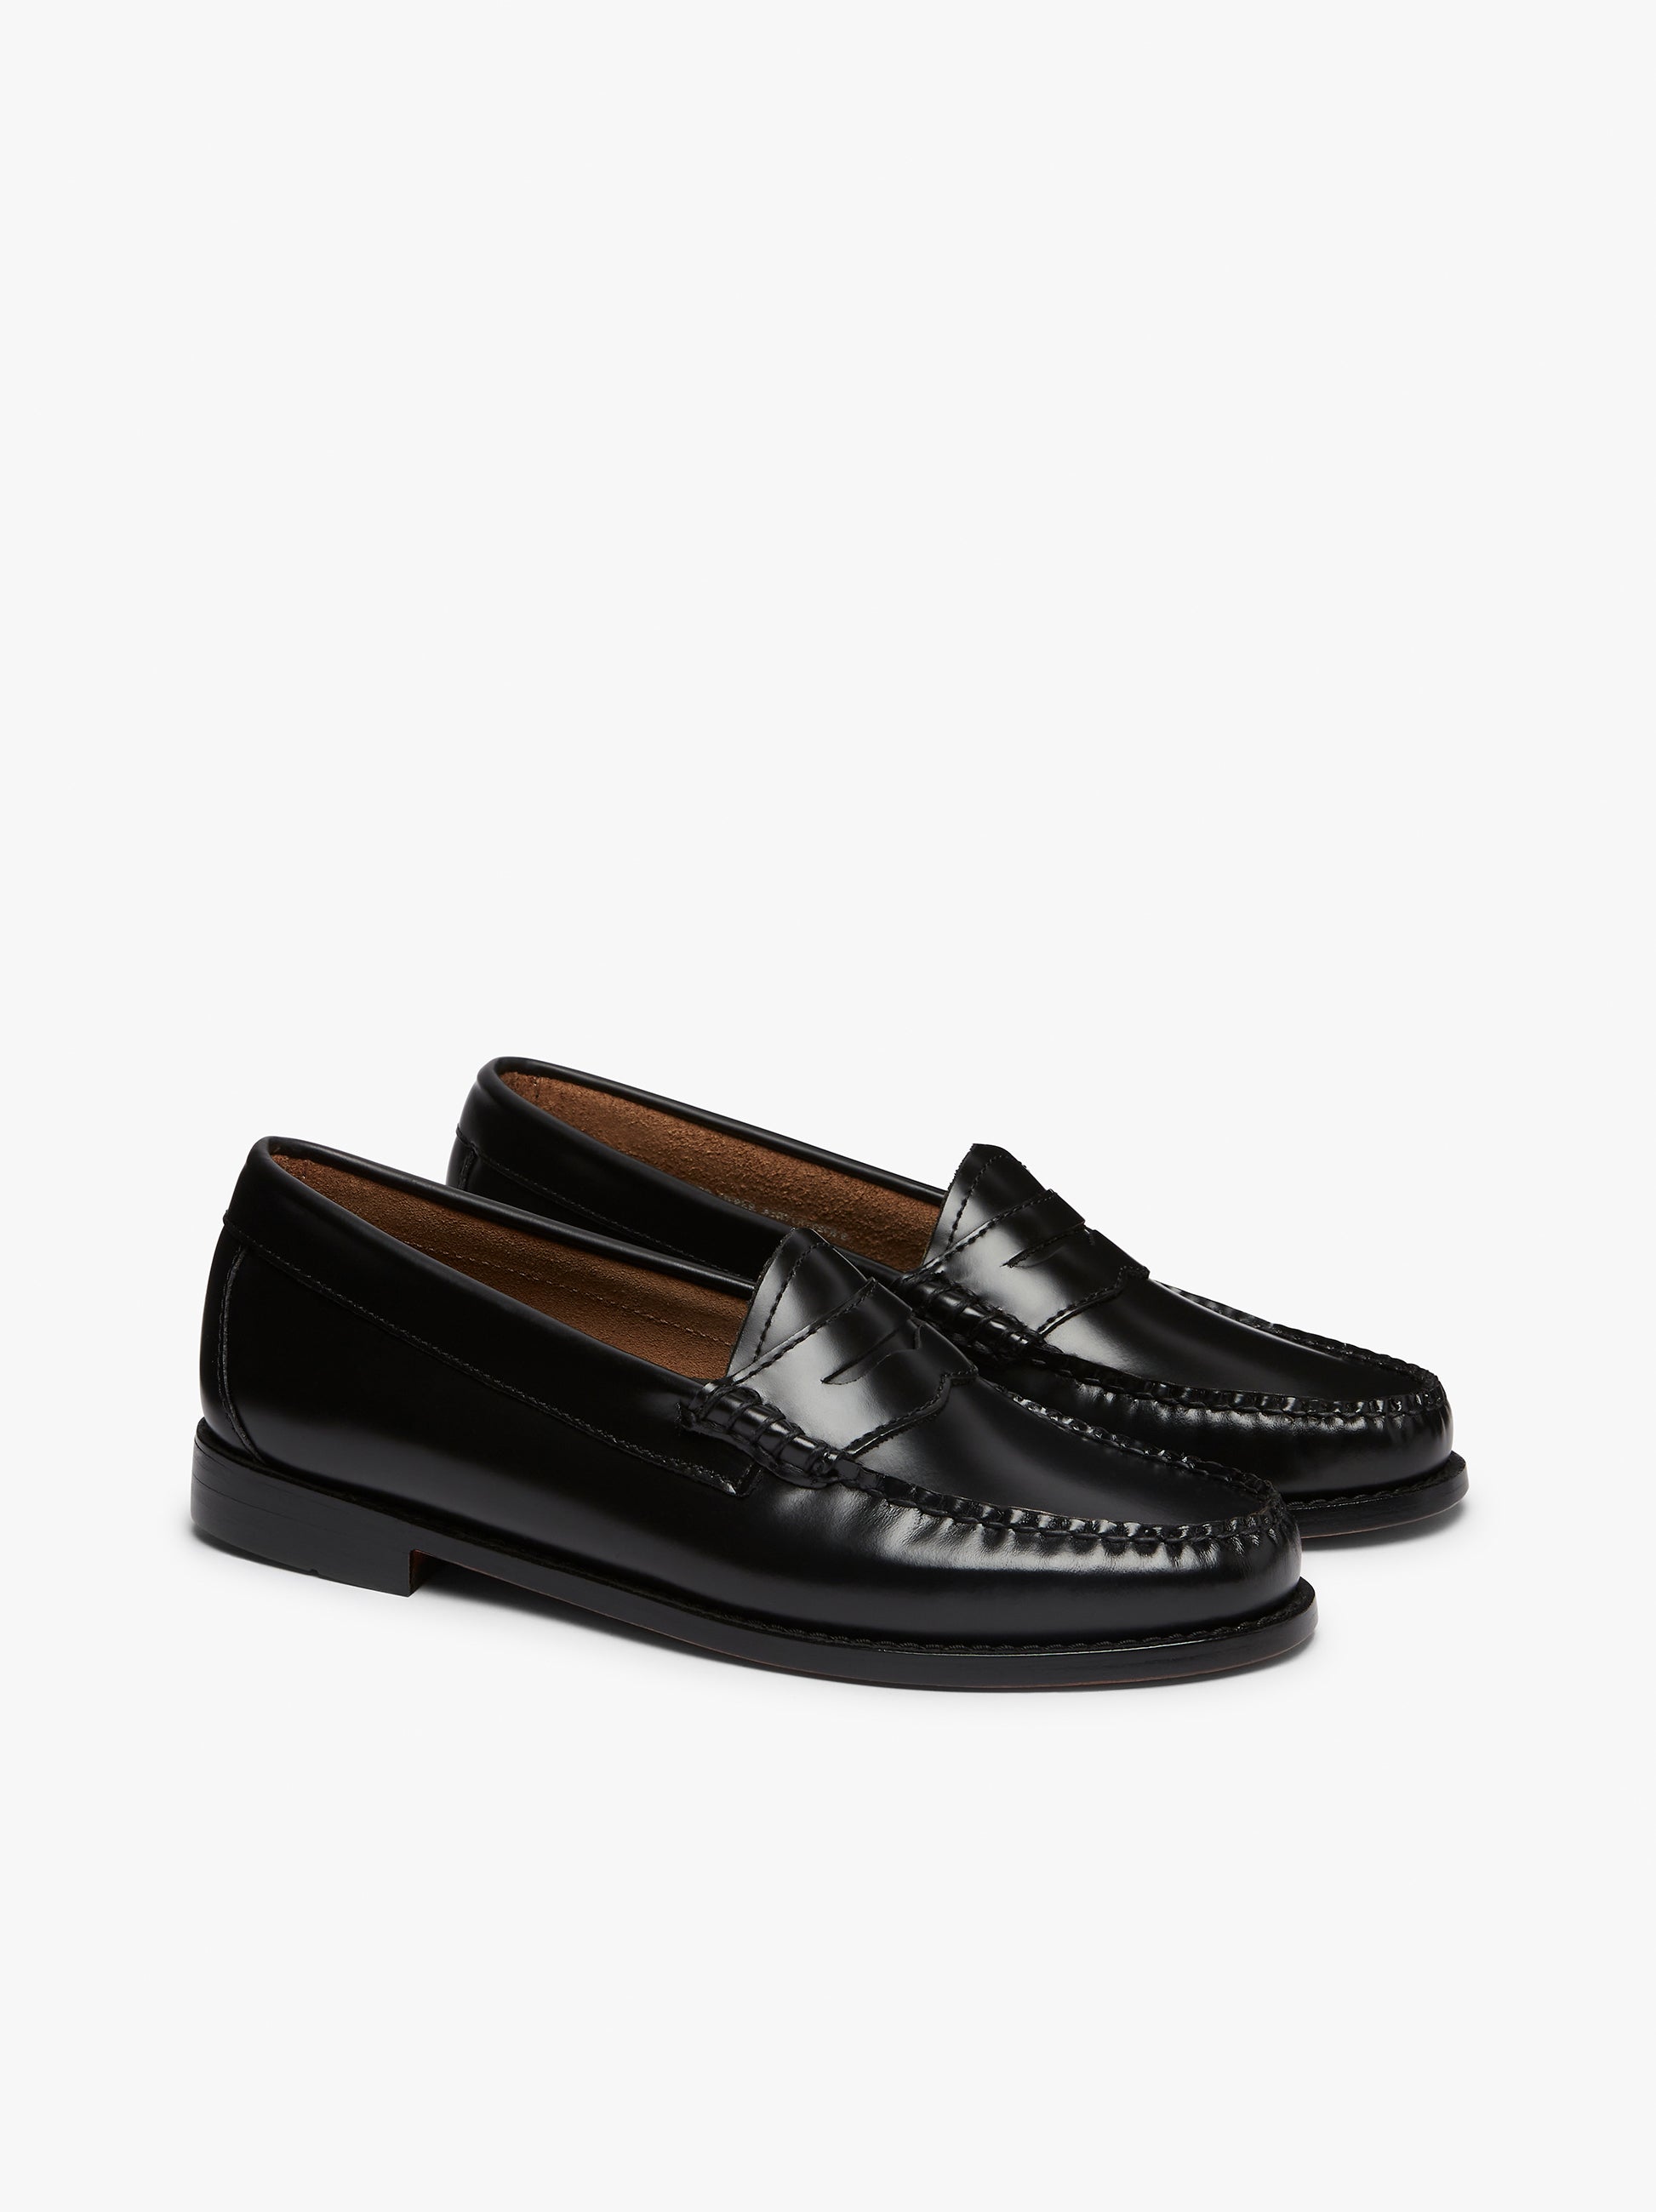 Black Penny Loafers Womens | Black Leather Penny Loafers Womens – G.H.BASS  1876